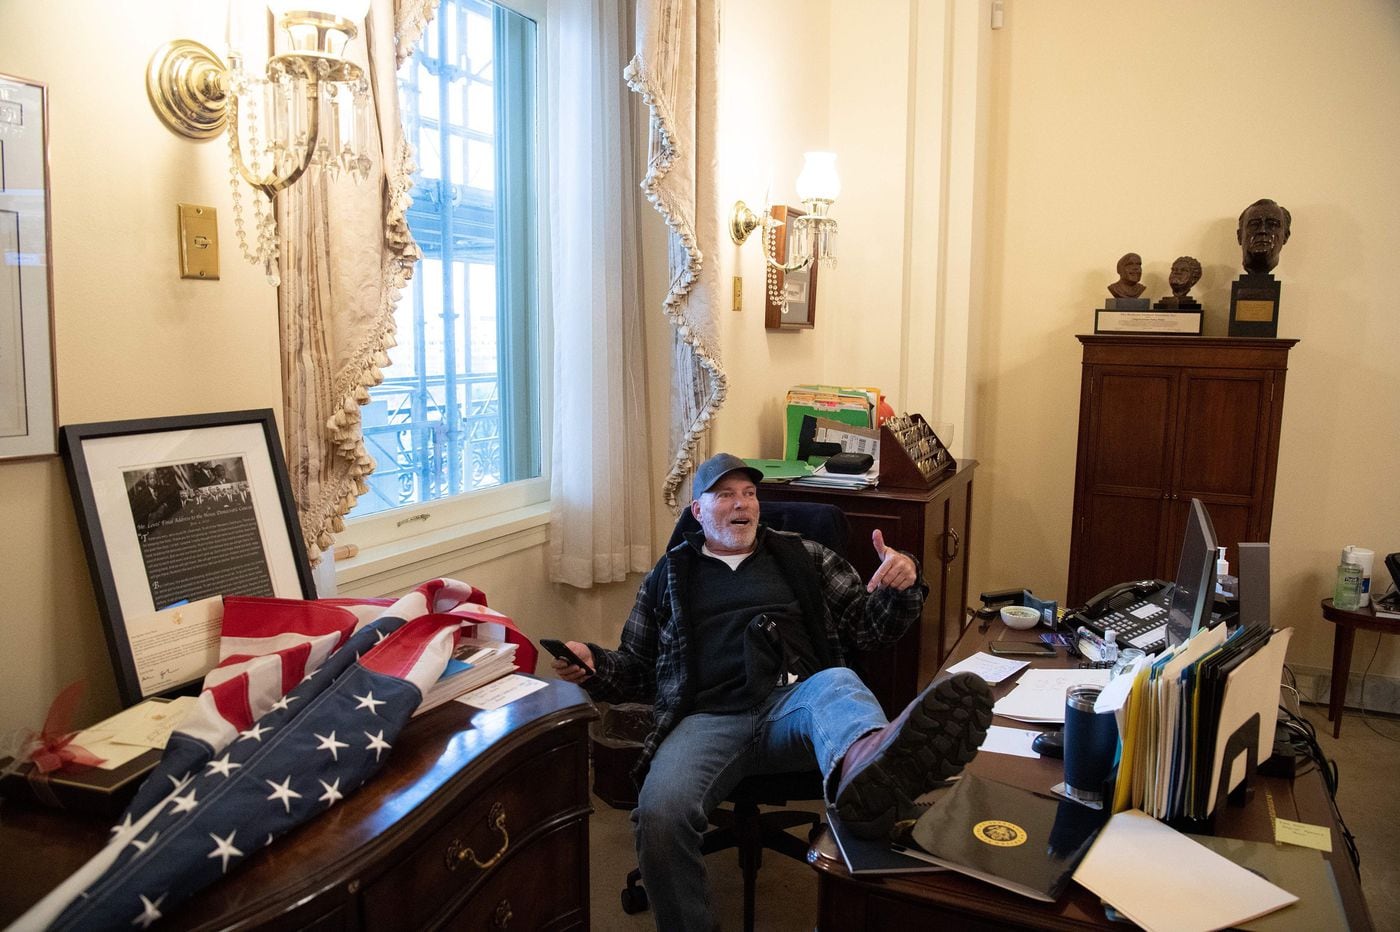 Capitol riot: Man who posed at Nancy Pelosi desk said on Facebook that he  is prepared for violent death